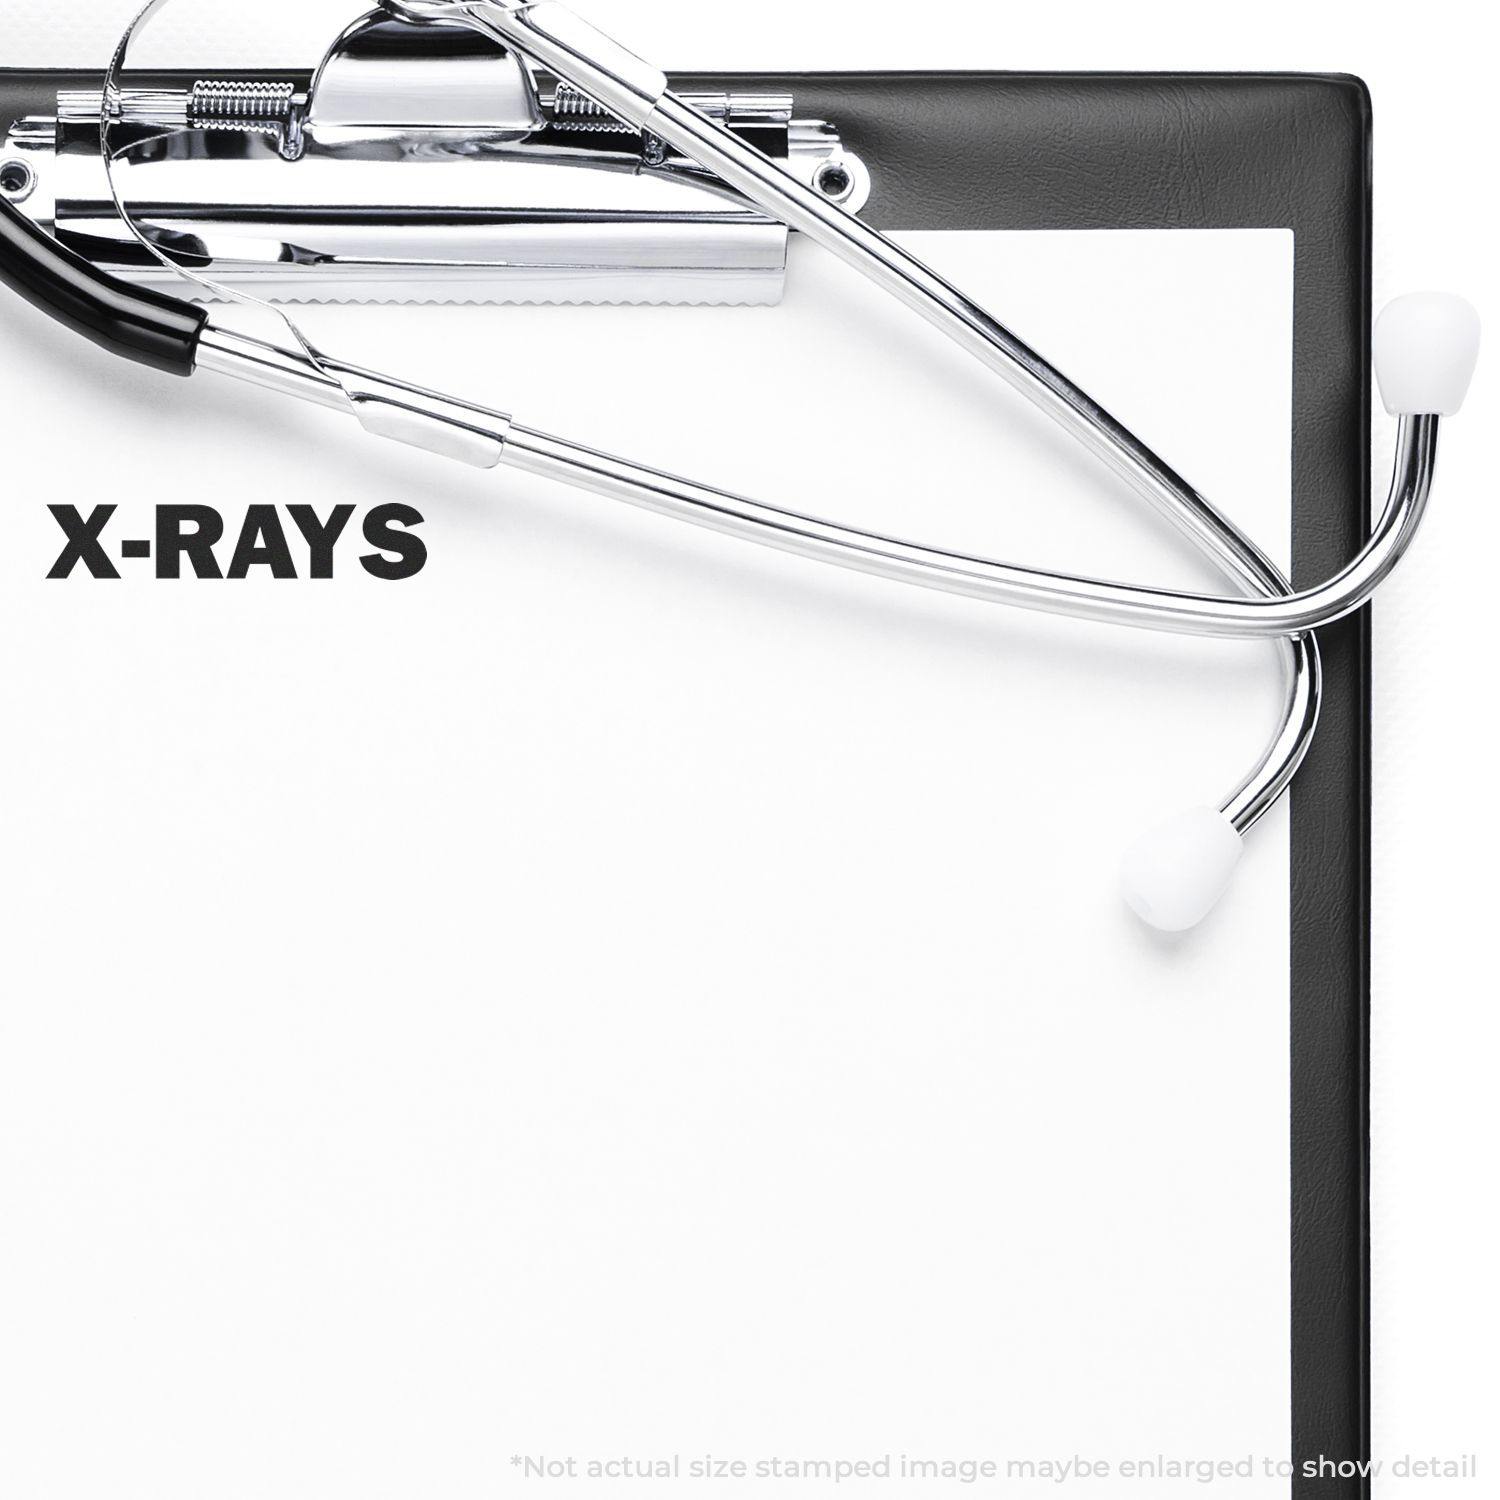 A self-inking stamp with a stamped image showing how the text "X-RAYS" is displayed after stamping.